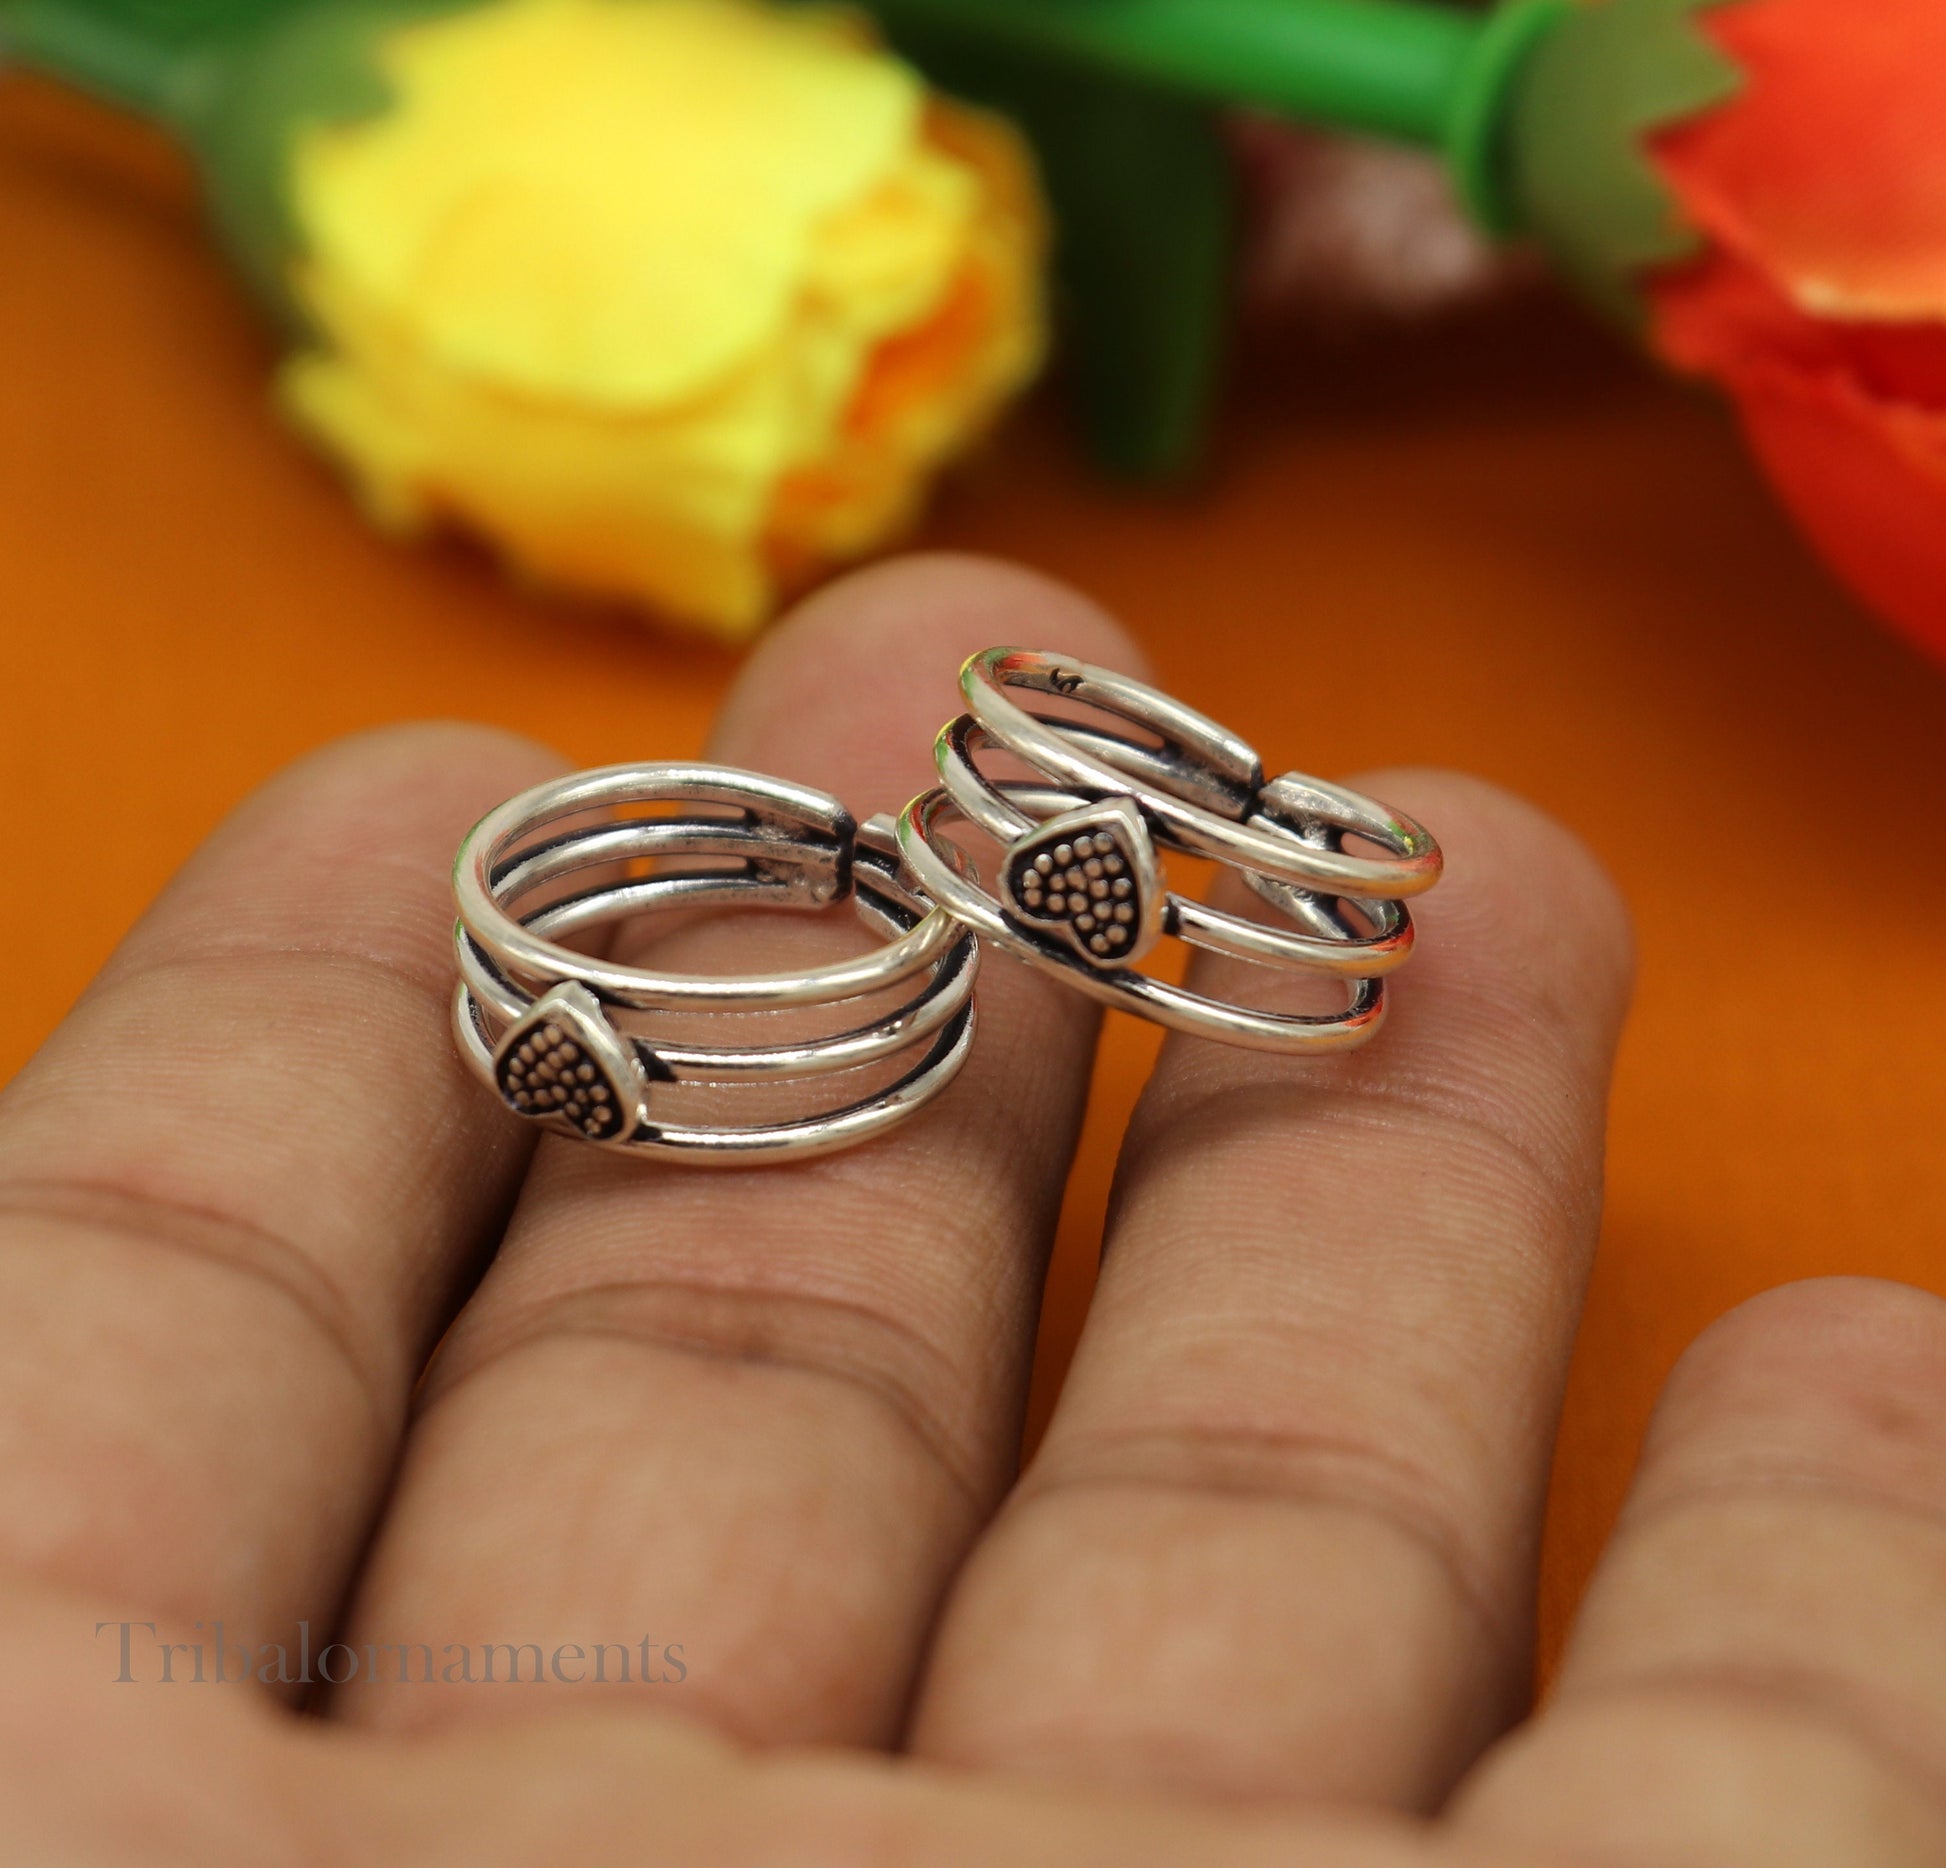 925 sterling silver excellent vintage design handmade toe ring, toe band stylish modern women's brides jewelry from india toer97 - TRIBAL ORNAMENTS